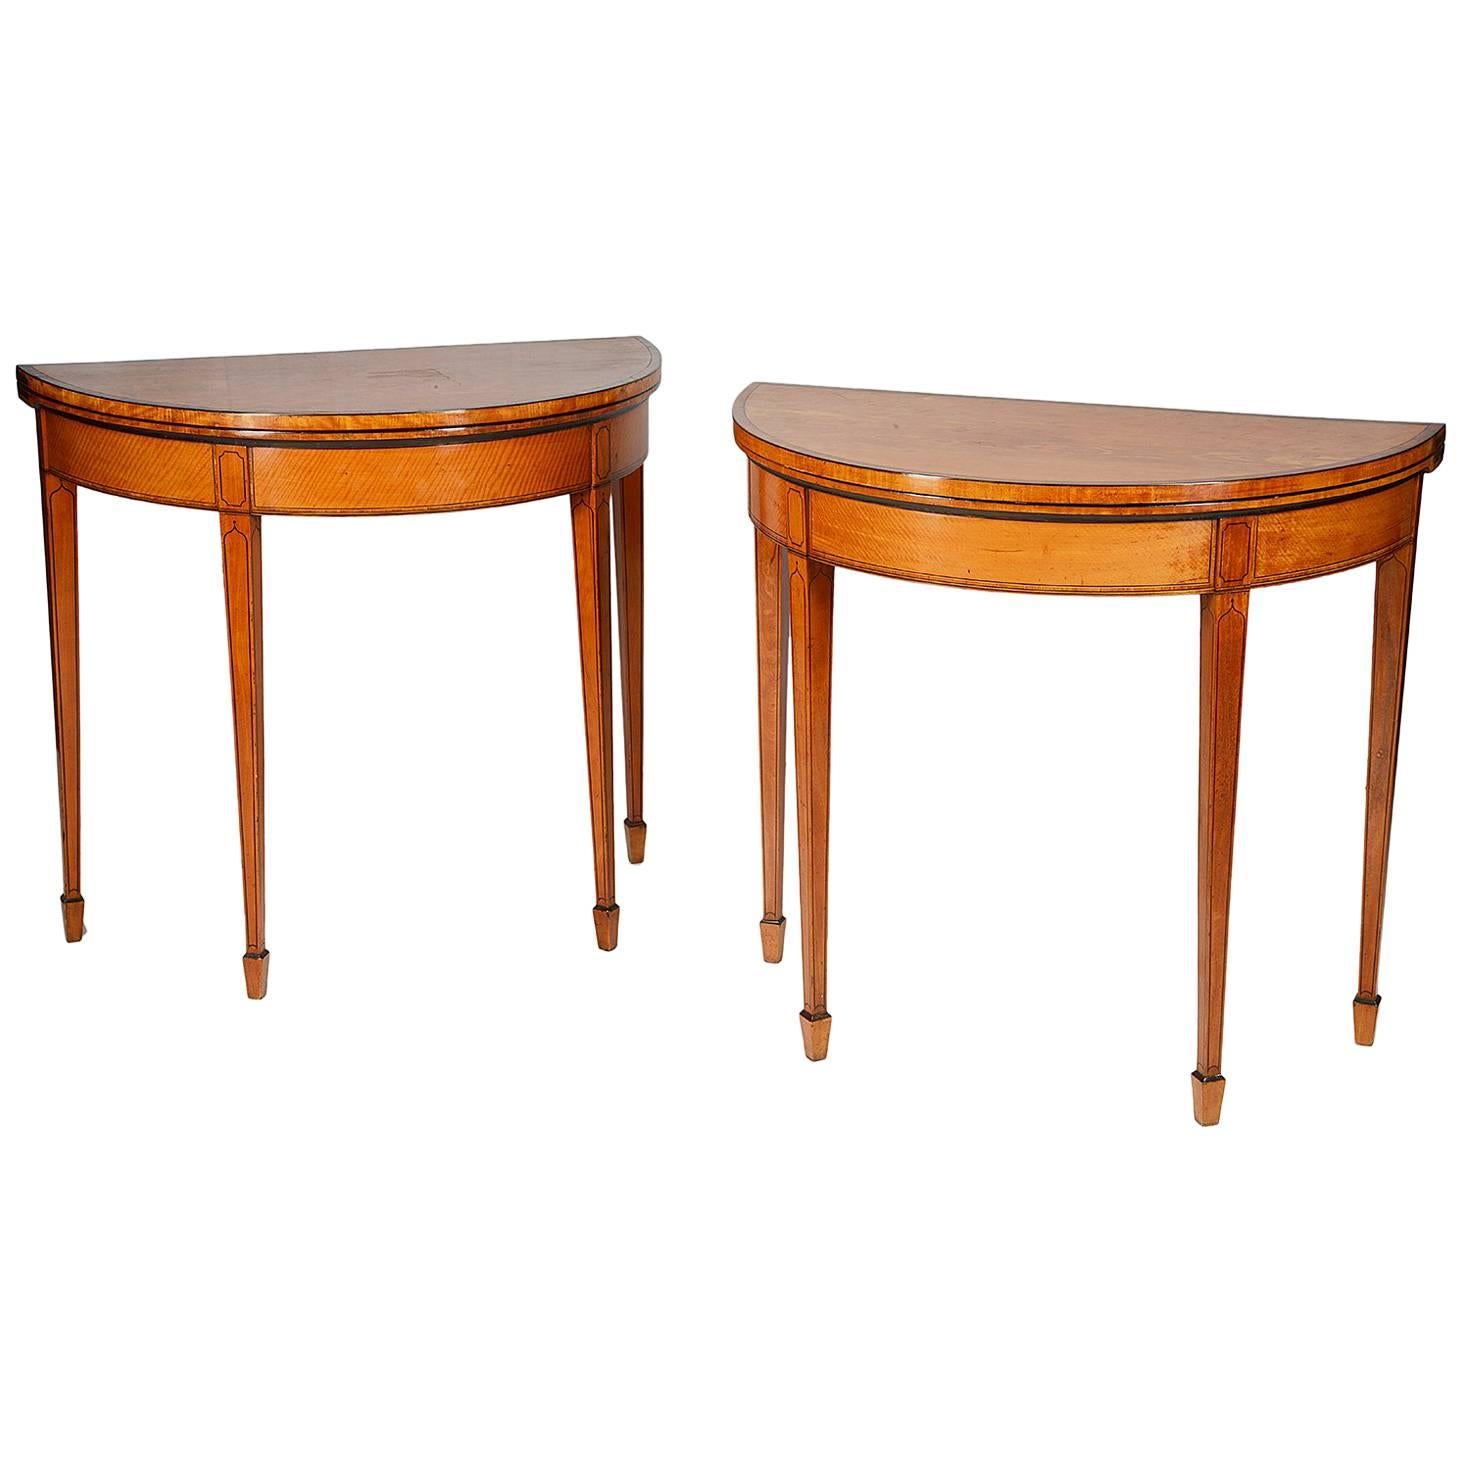 Pair of 18th century Sheraton Period Satinwood Card Tables